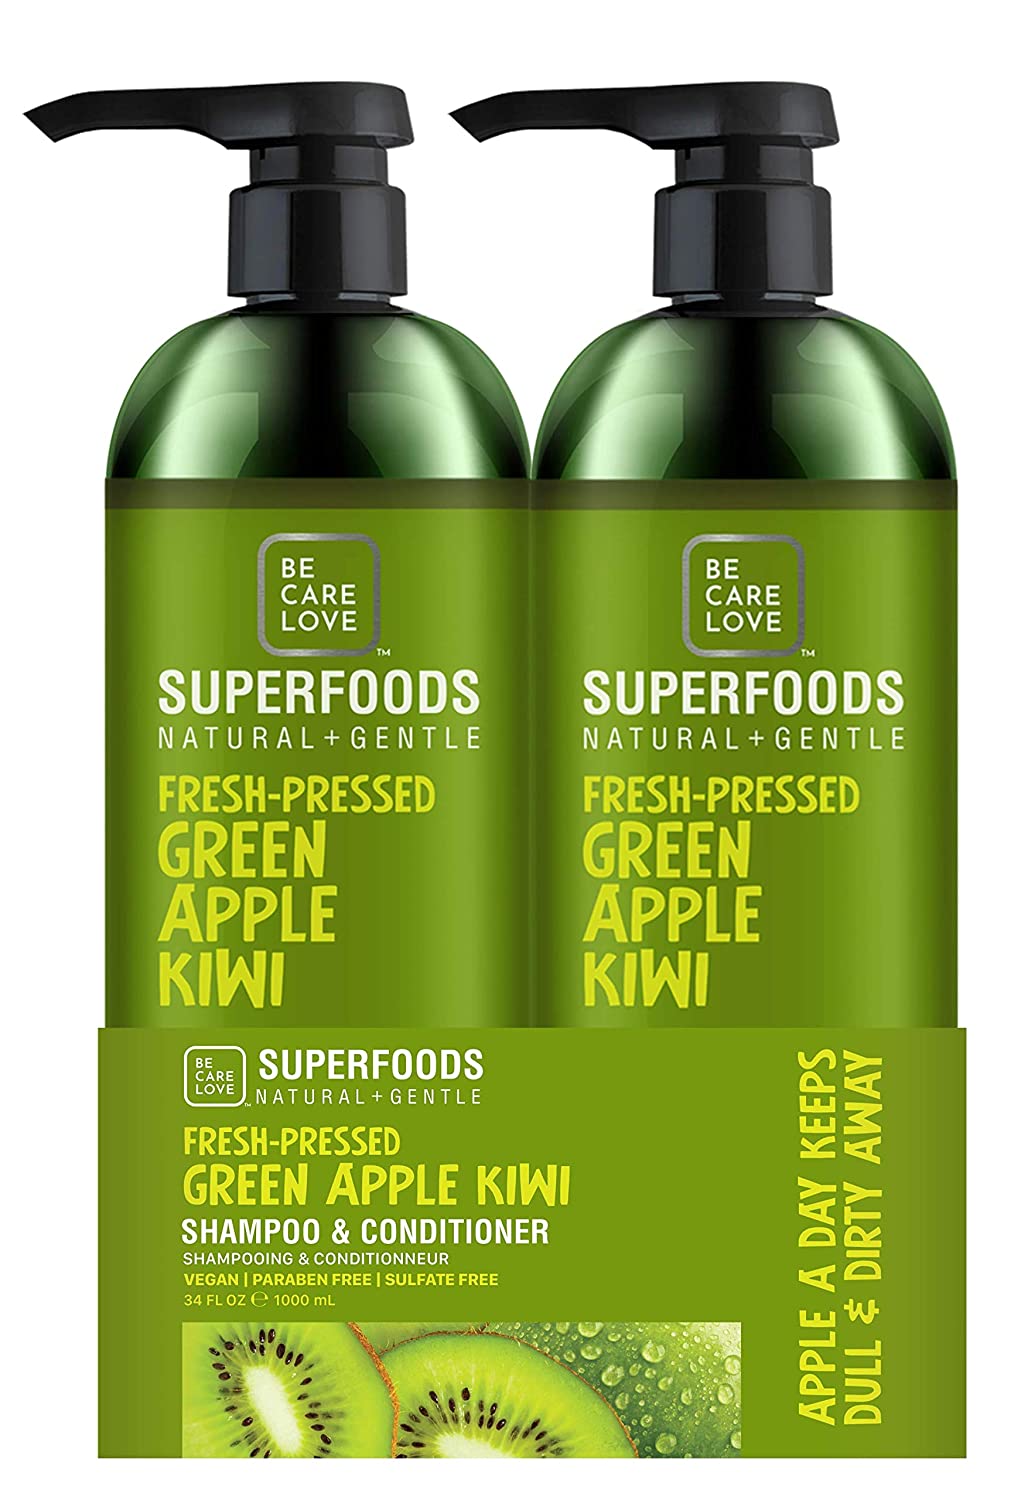 BCL Superfoods Natural + Gentle Clarifying Shampoo & Conditioner Twin Pack 34 oz